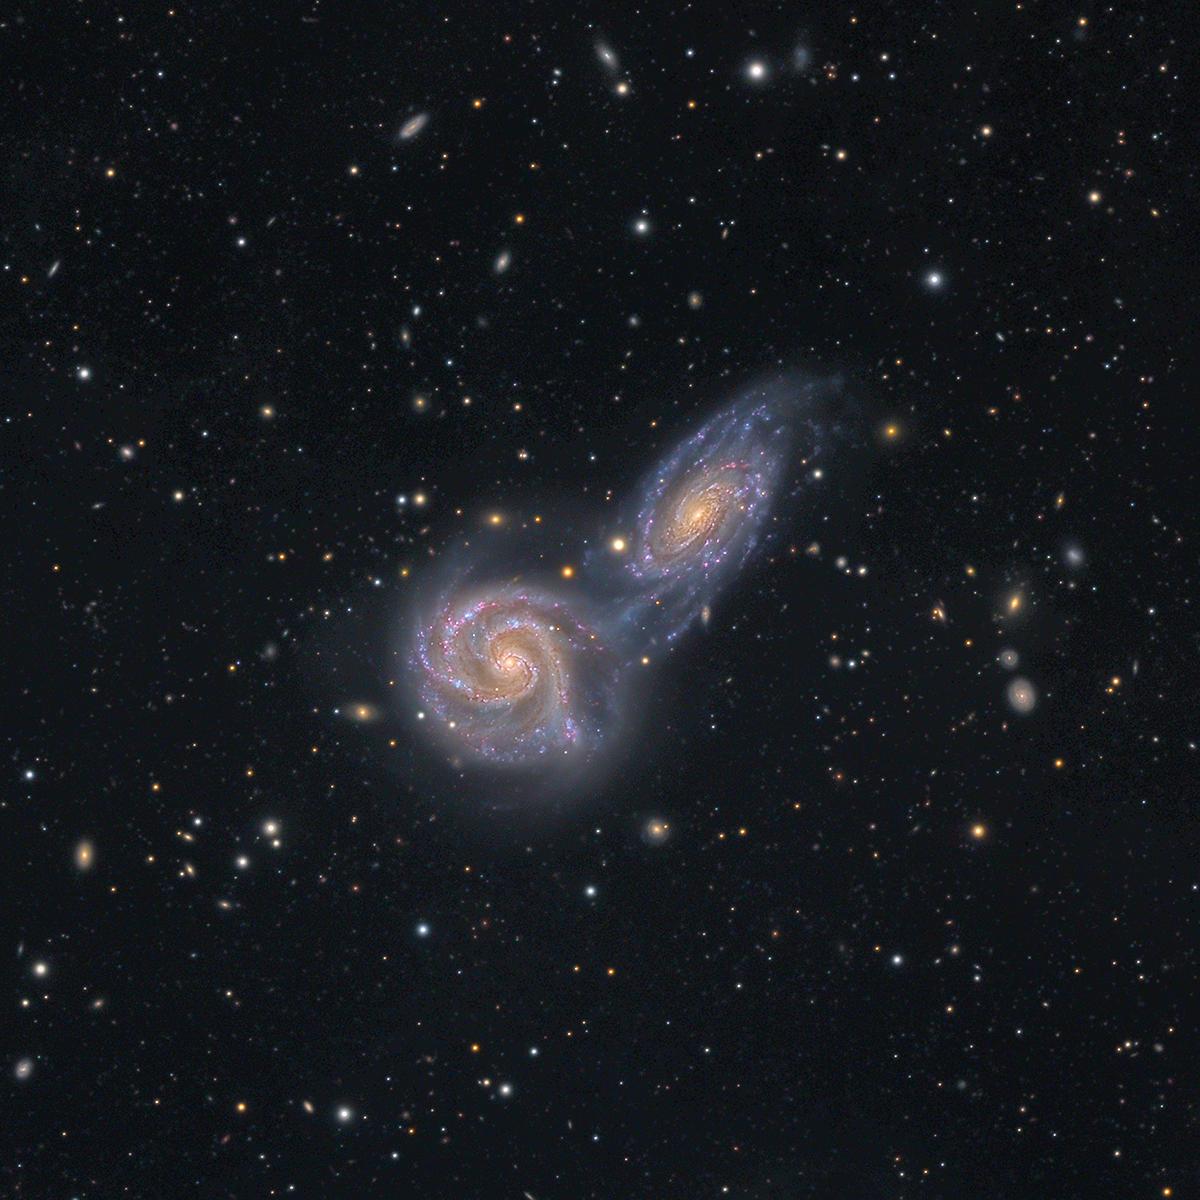 Two galaxies seemingly colliding, against a starry black sky 